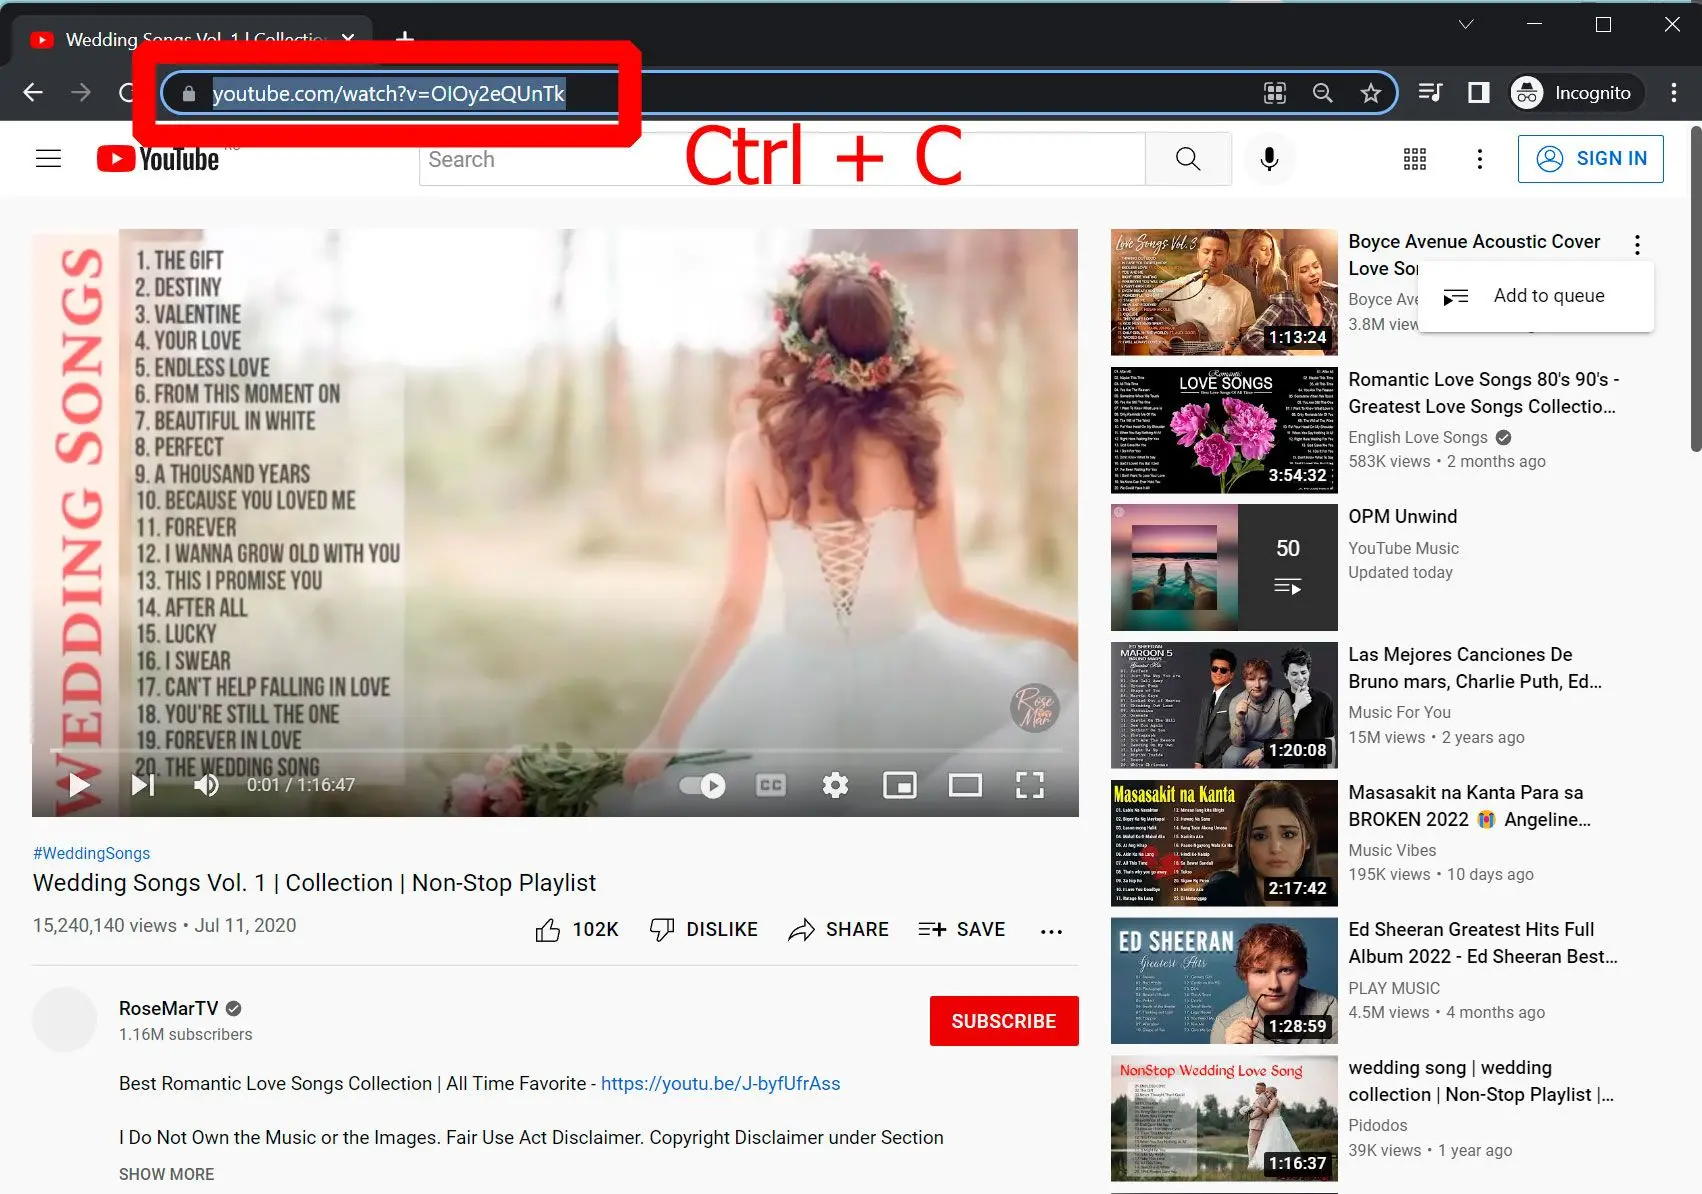 How to download YouTube videos step by step - Step 1.